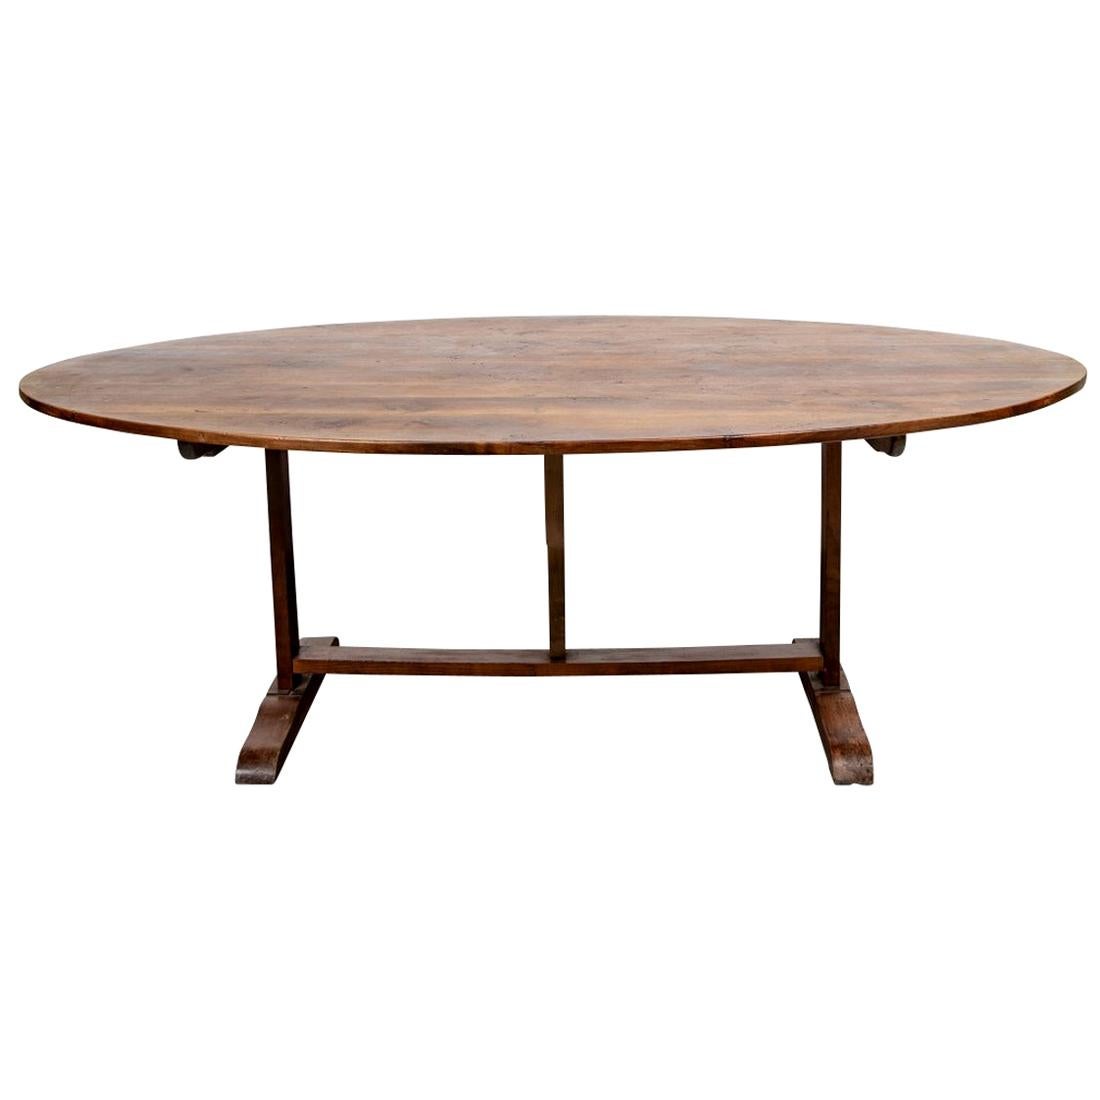 Exceptional Antique French Walnut Vineyard Harvest Table